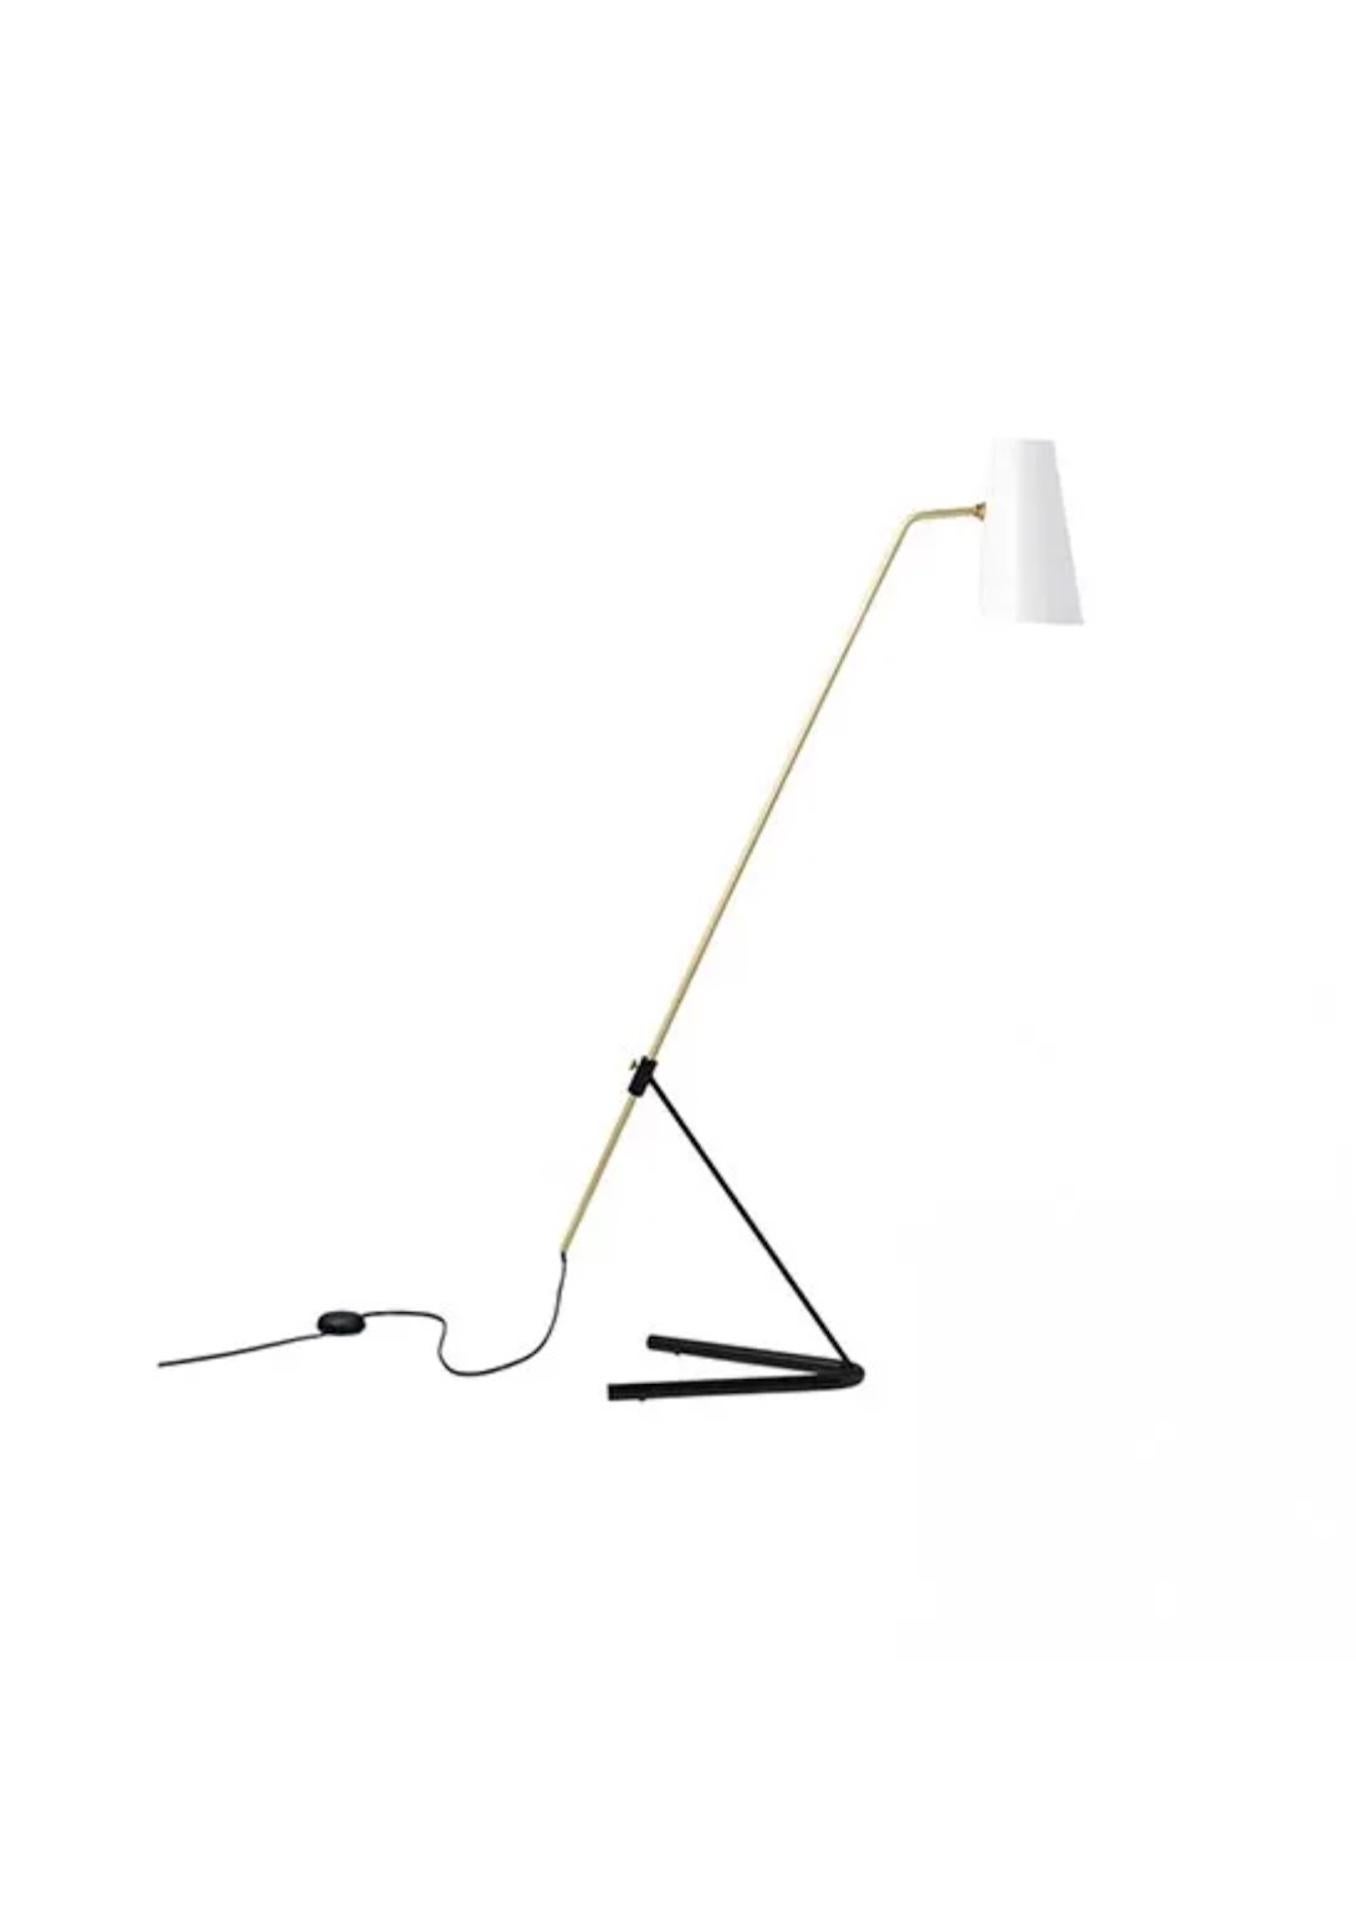 The G21 reading lamp is the perfect source of precise, intimate accent lighting. Available with a black/white or white/white lampshade and in a slightly perforated version, this model designed by Pierre Guariche in 1951 features a metal shade to